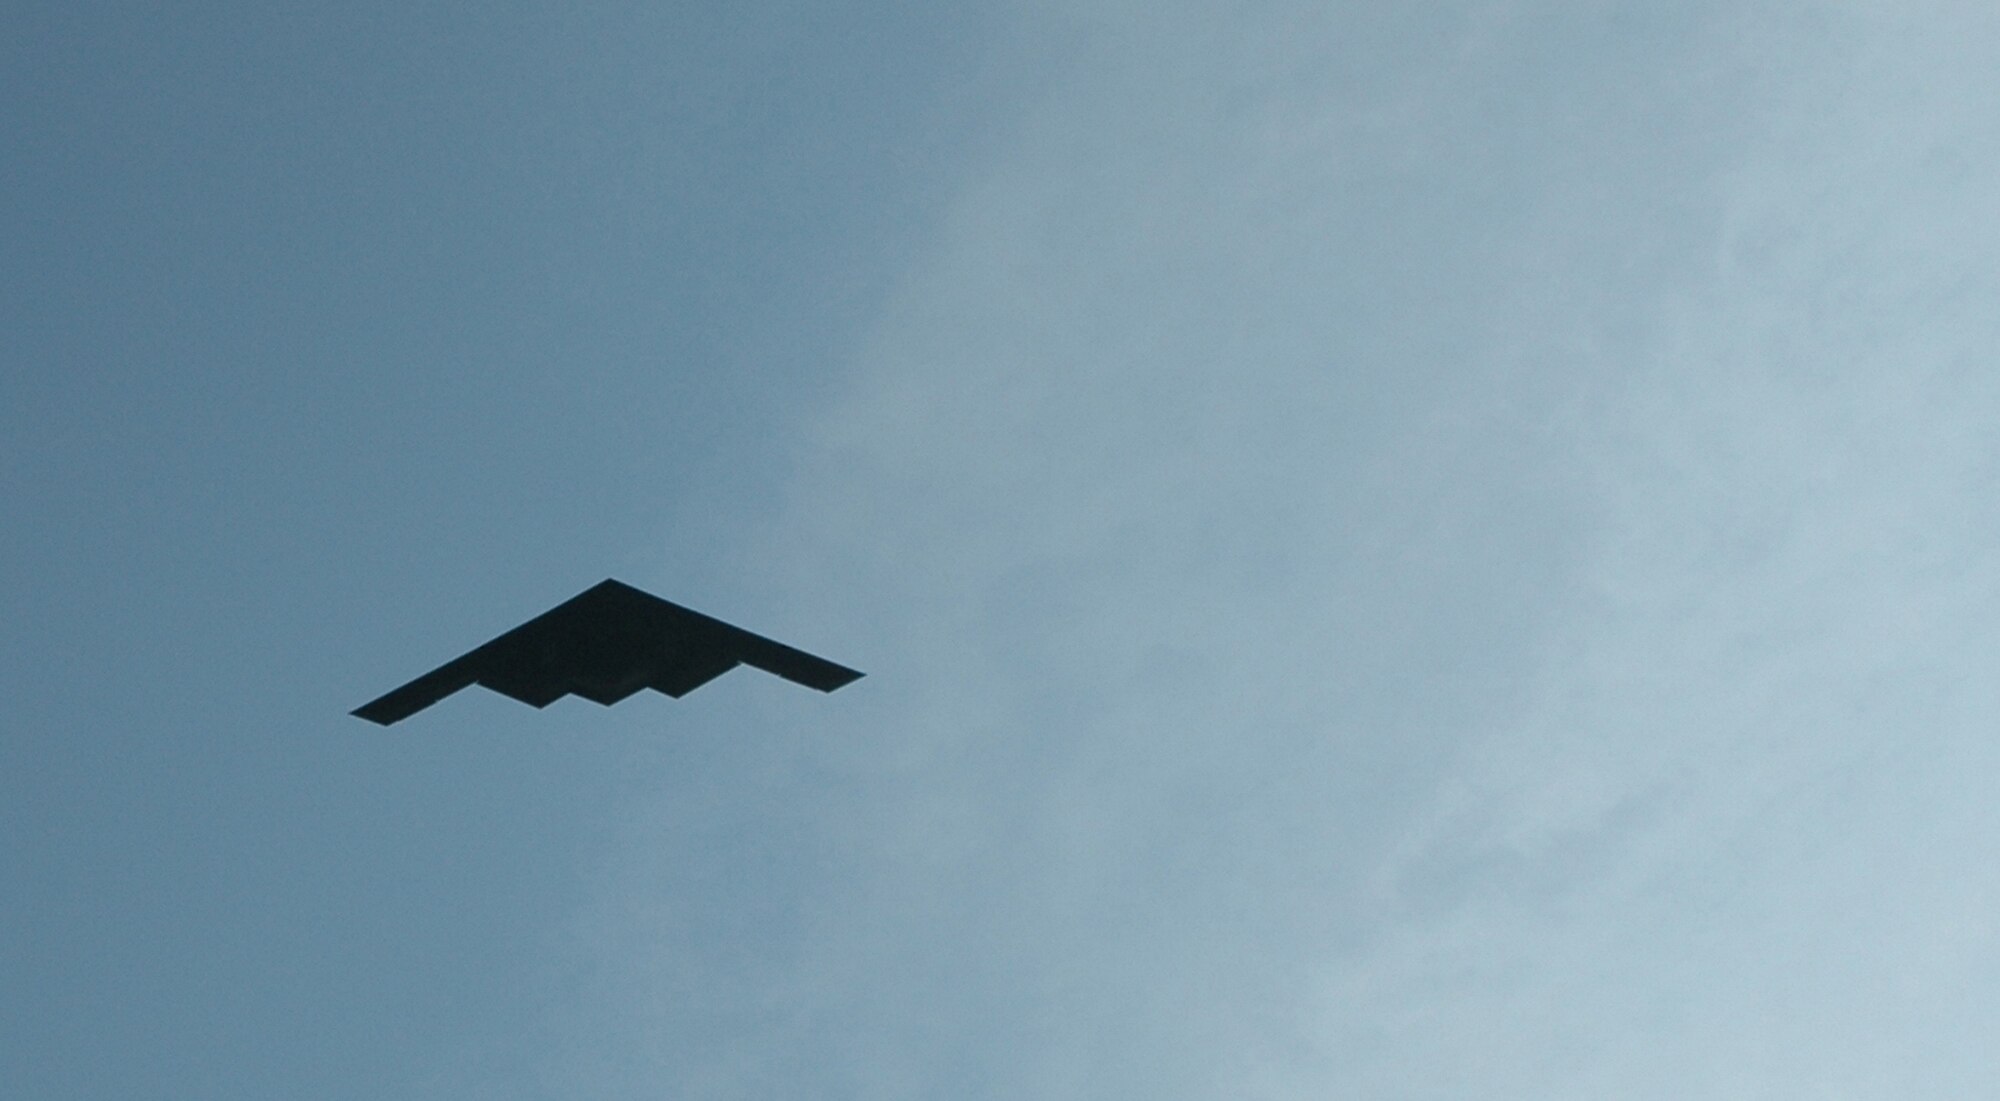 A B-2 Bomber flies over the ribbon cutting ceremony at Whiteman Air Force Base Oct. 4.  October was the first official drill for traditional guardsmen from the 131st Fighter Wing transitioning to the 131st Bomb Wing. (Photo by Master Sgt. Mary-Dale Amison)